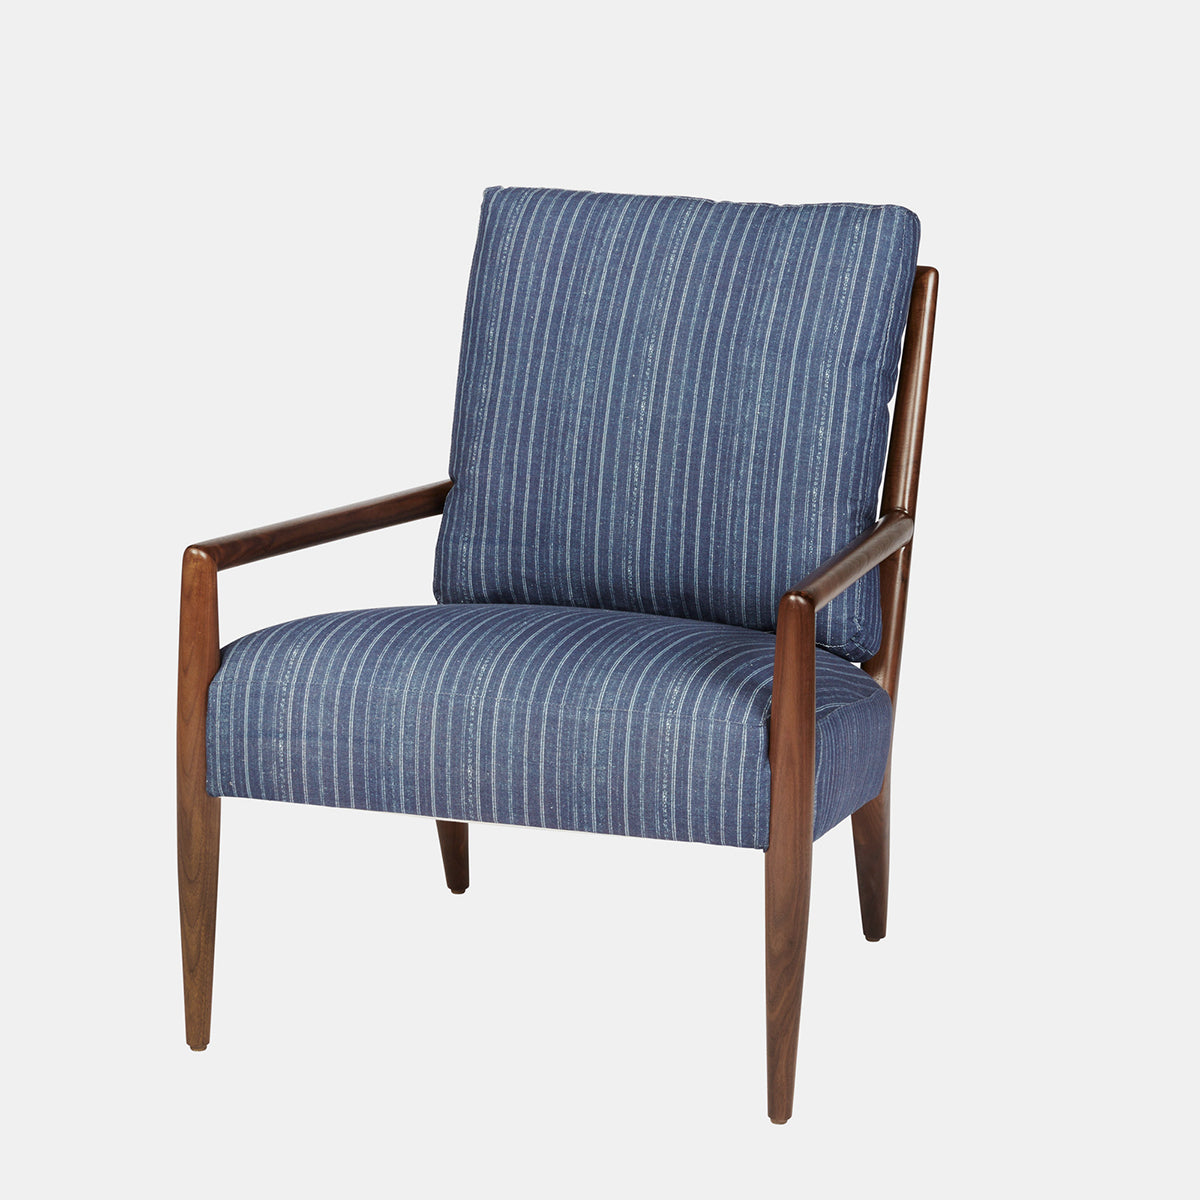 Made to Order Montauk Chair